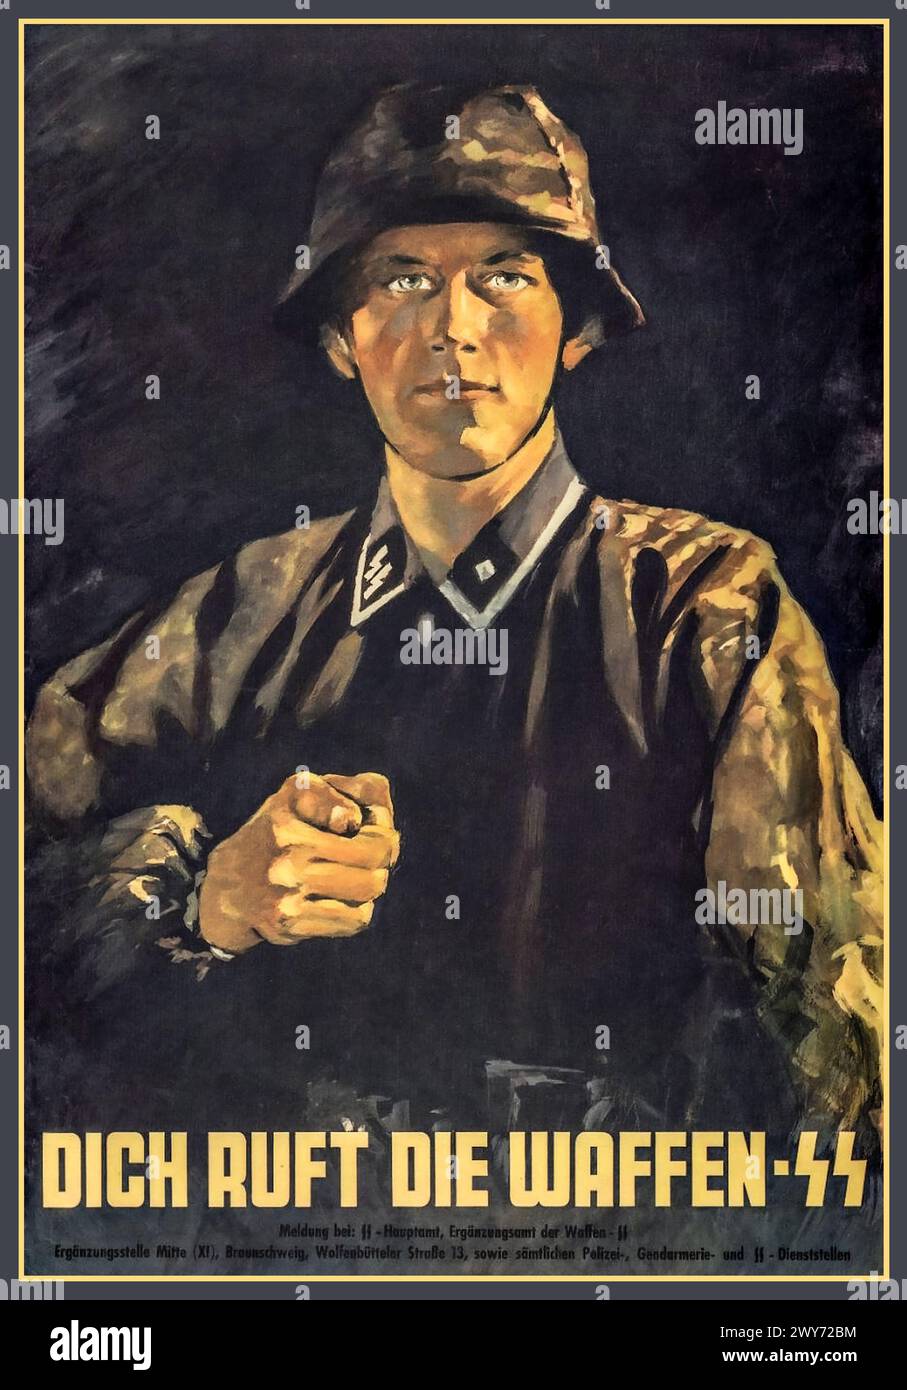 WW2 Nazi Waffen SS Recruitment Poster ' THE WAFFEN SS CALLS TO YOU ' 1940s Nazi Germany 'DICH RUFT DIE WAFFEN -SS' Banque D'Images